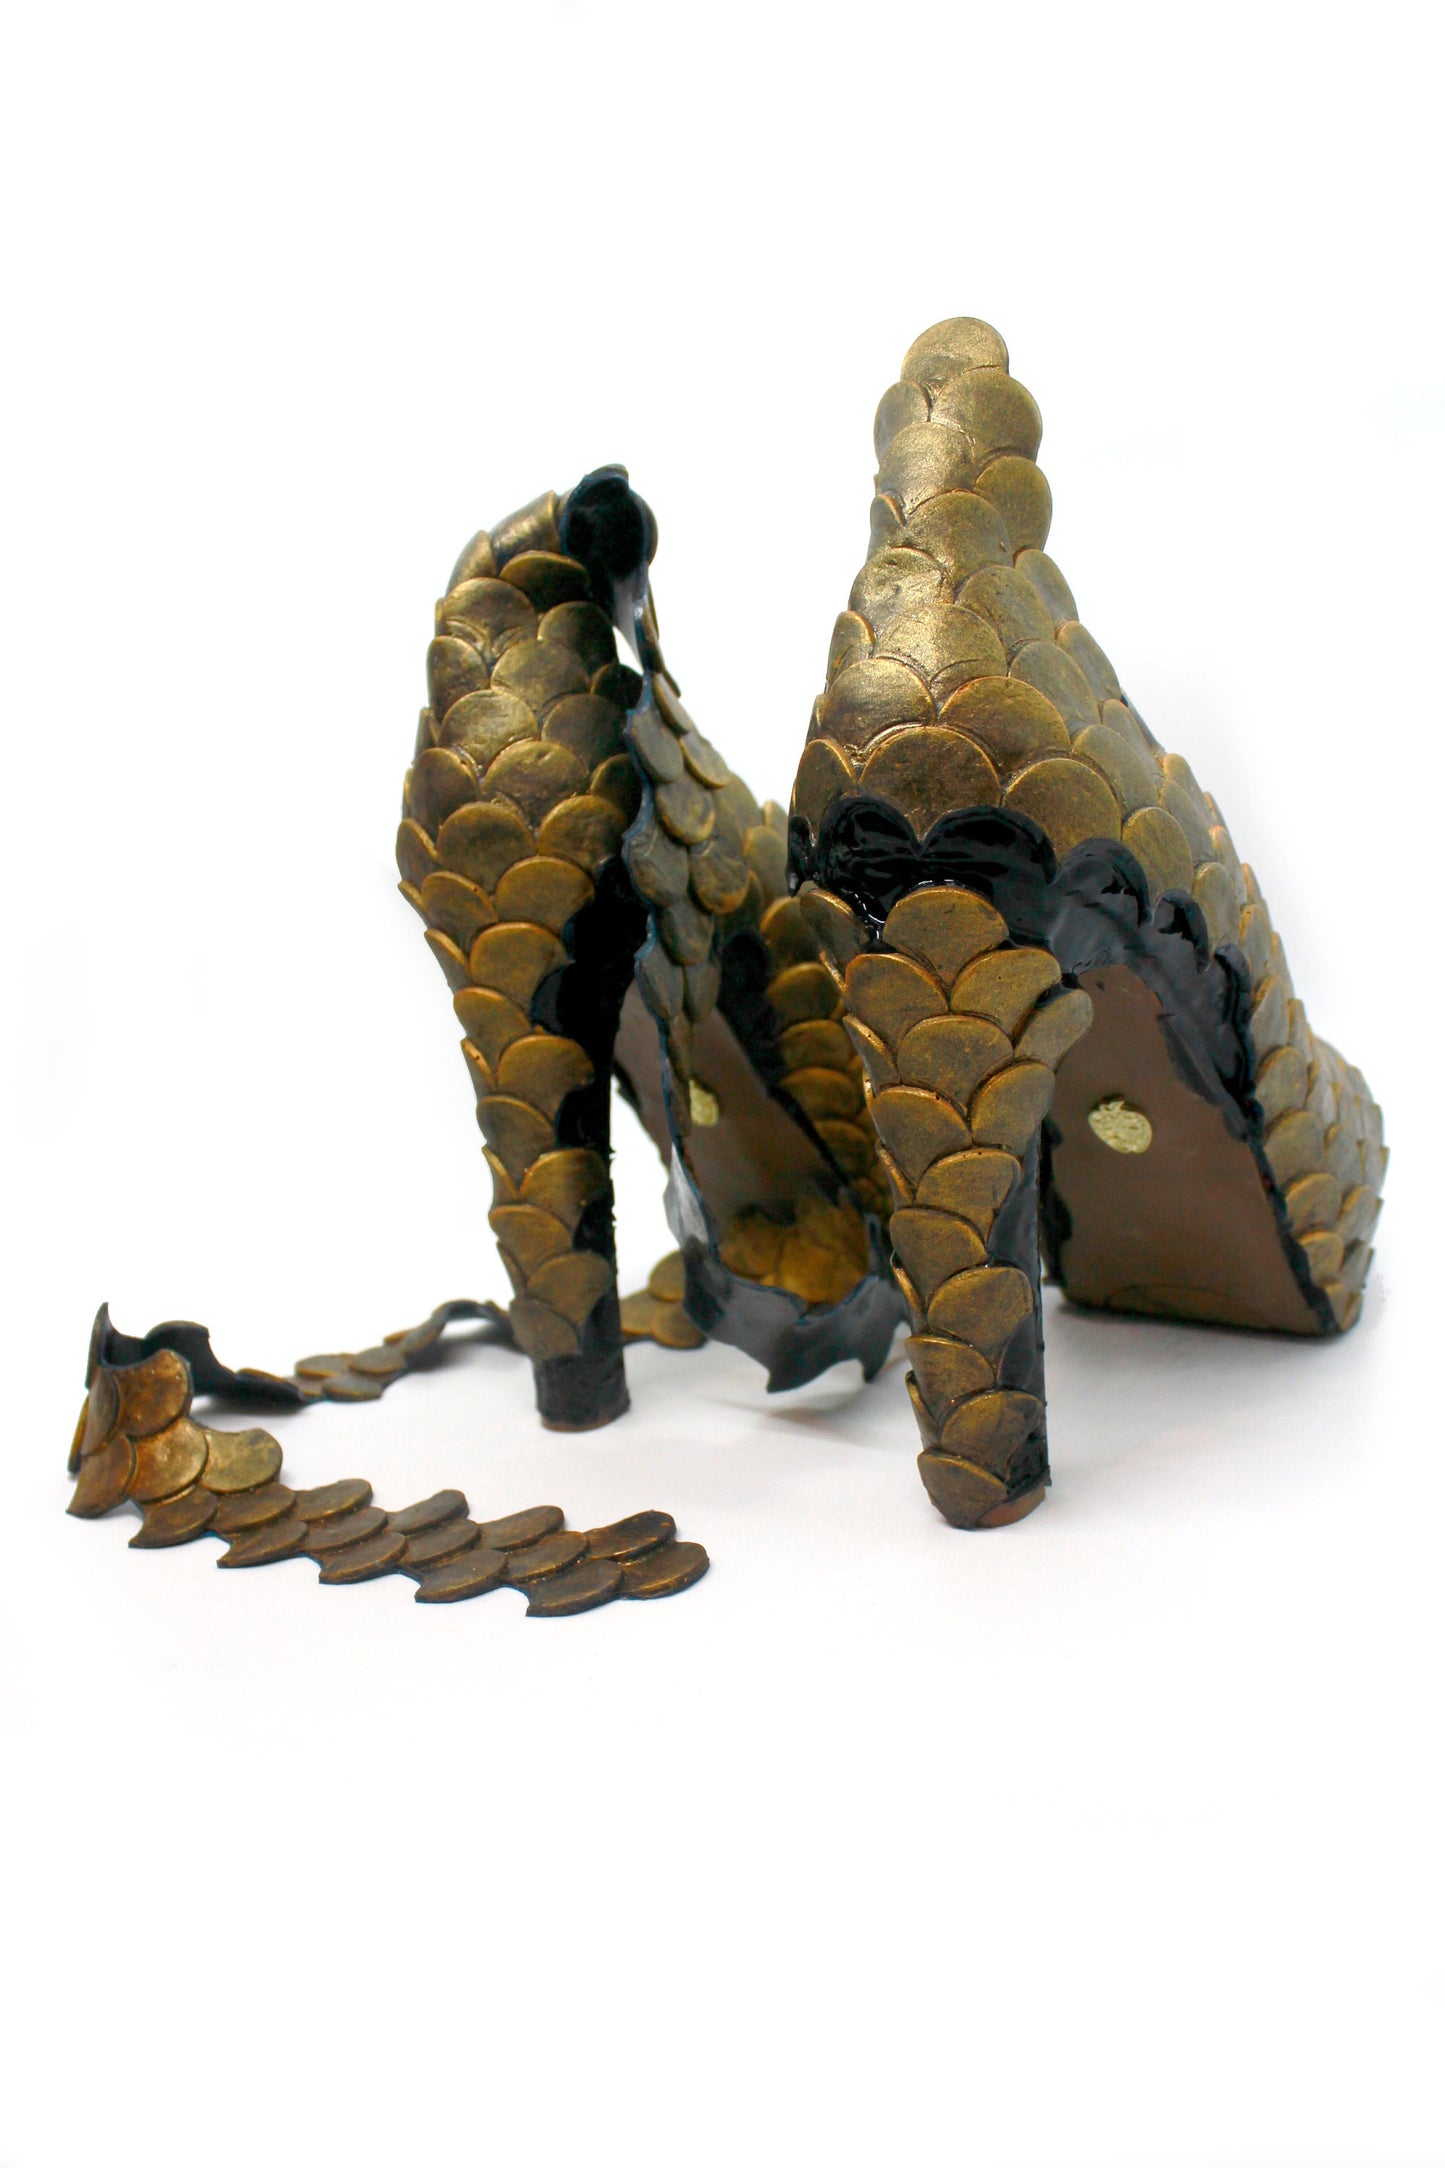 Shoes / High heels, covered with gold and black silicone, fish scales / mermaid / dragon!